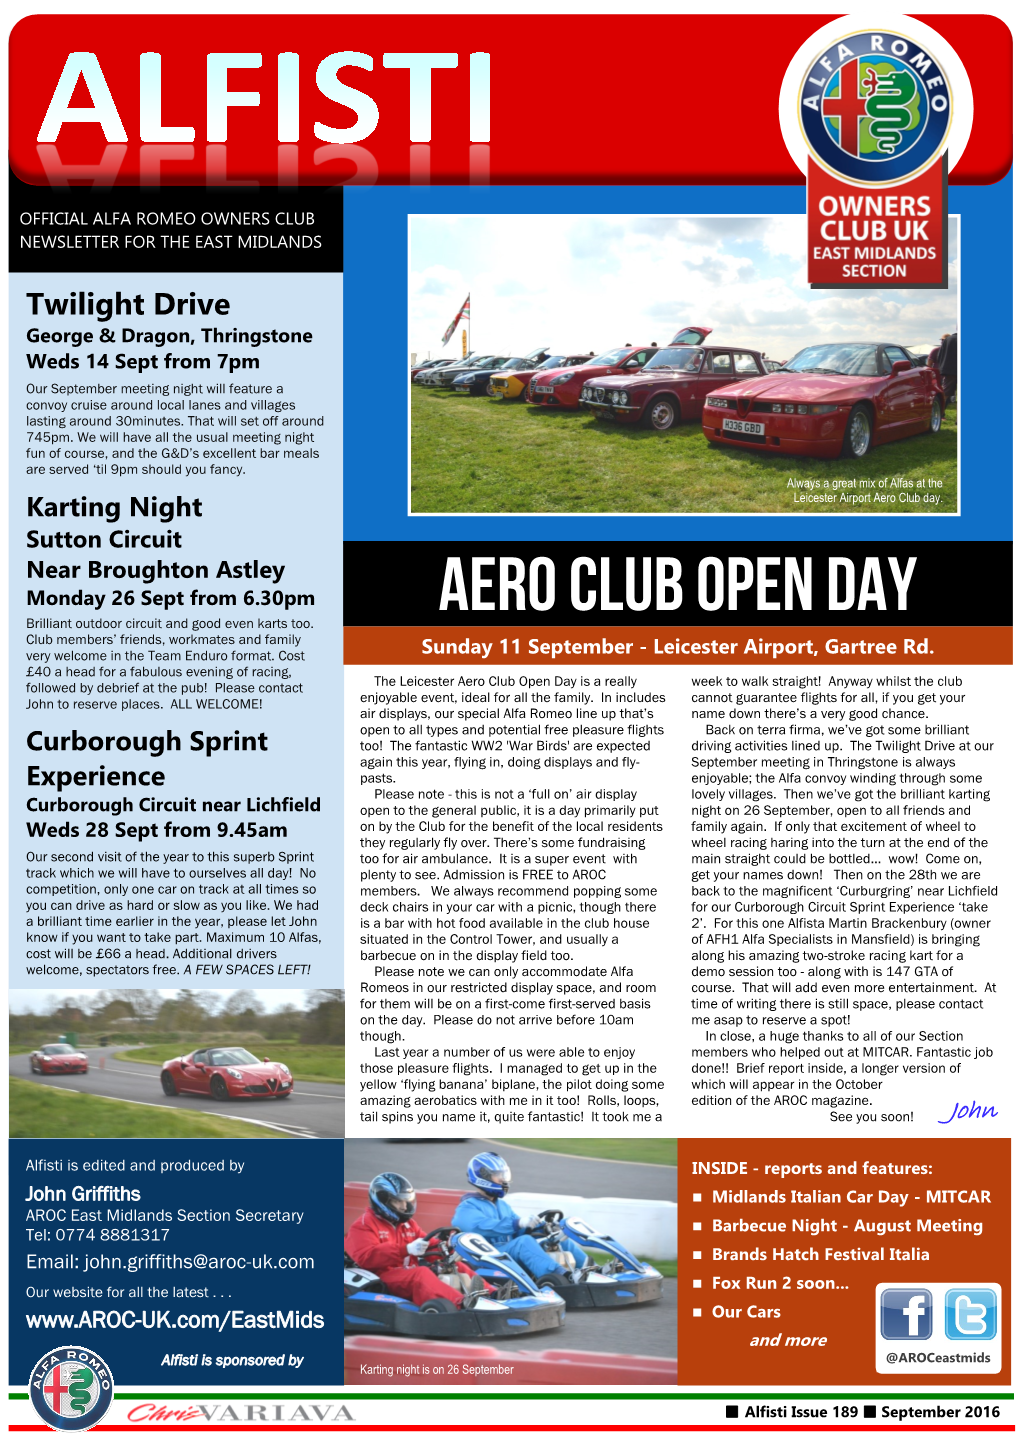 AERO CLUB OPEN DAY Brilliant Outdoor Circuit and Good Even Karts Too